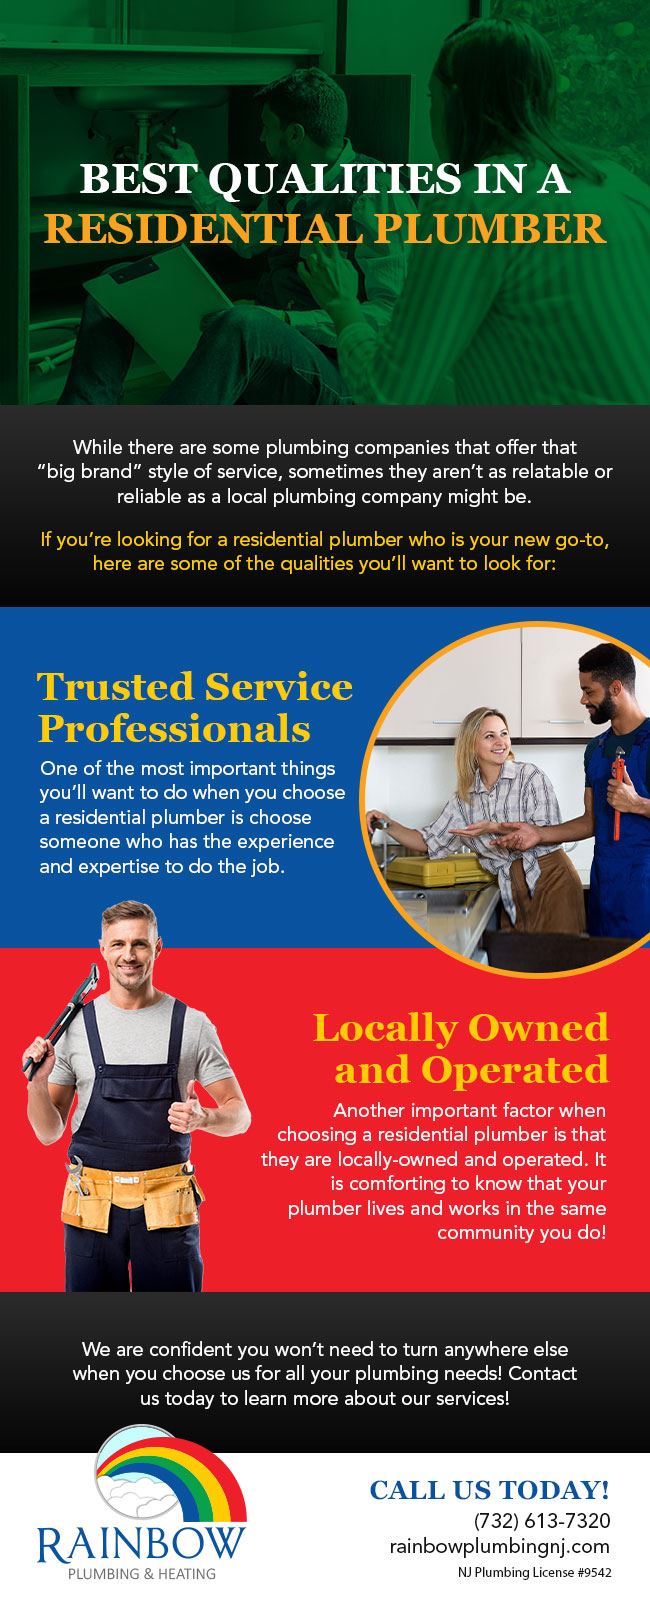 Best Qualities in a Residential Plumber